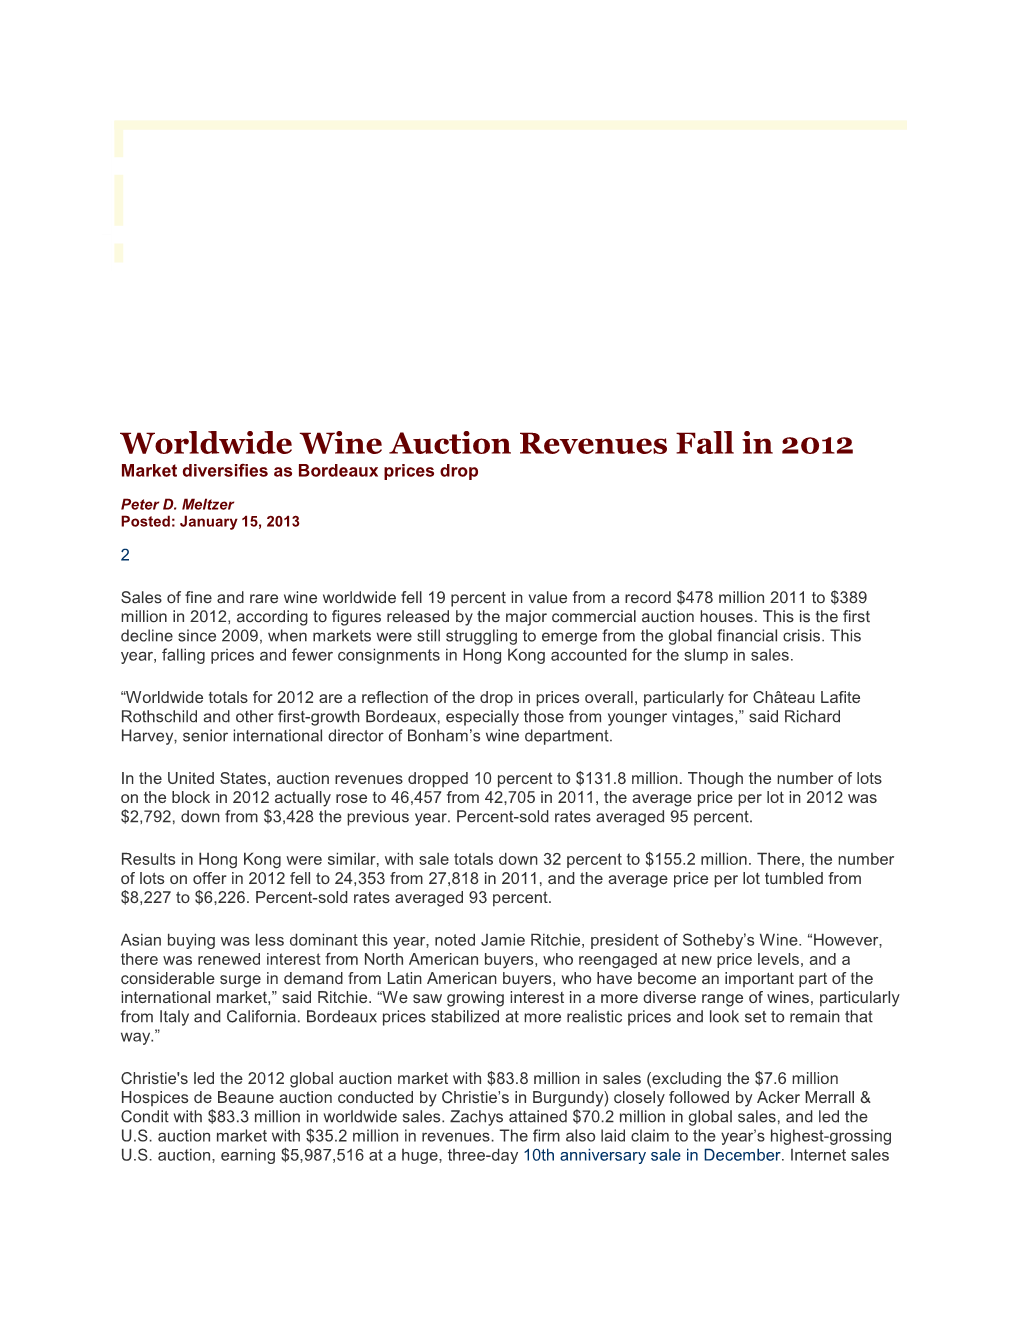 Worldwide Wine Auction Revenues Fall in 2012 Market Diversifies As Bordeaux Prices Drop